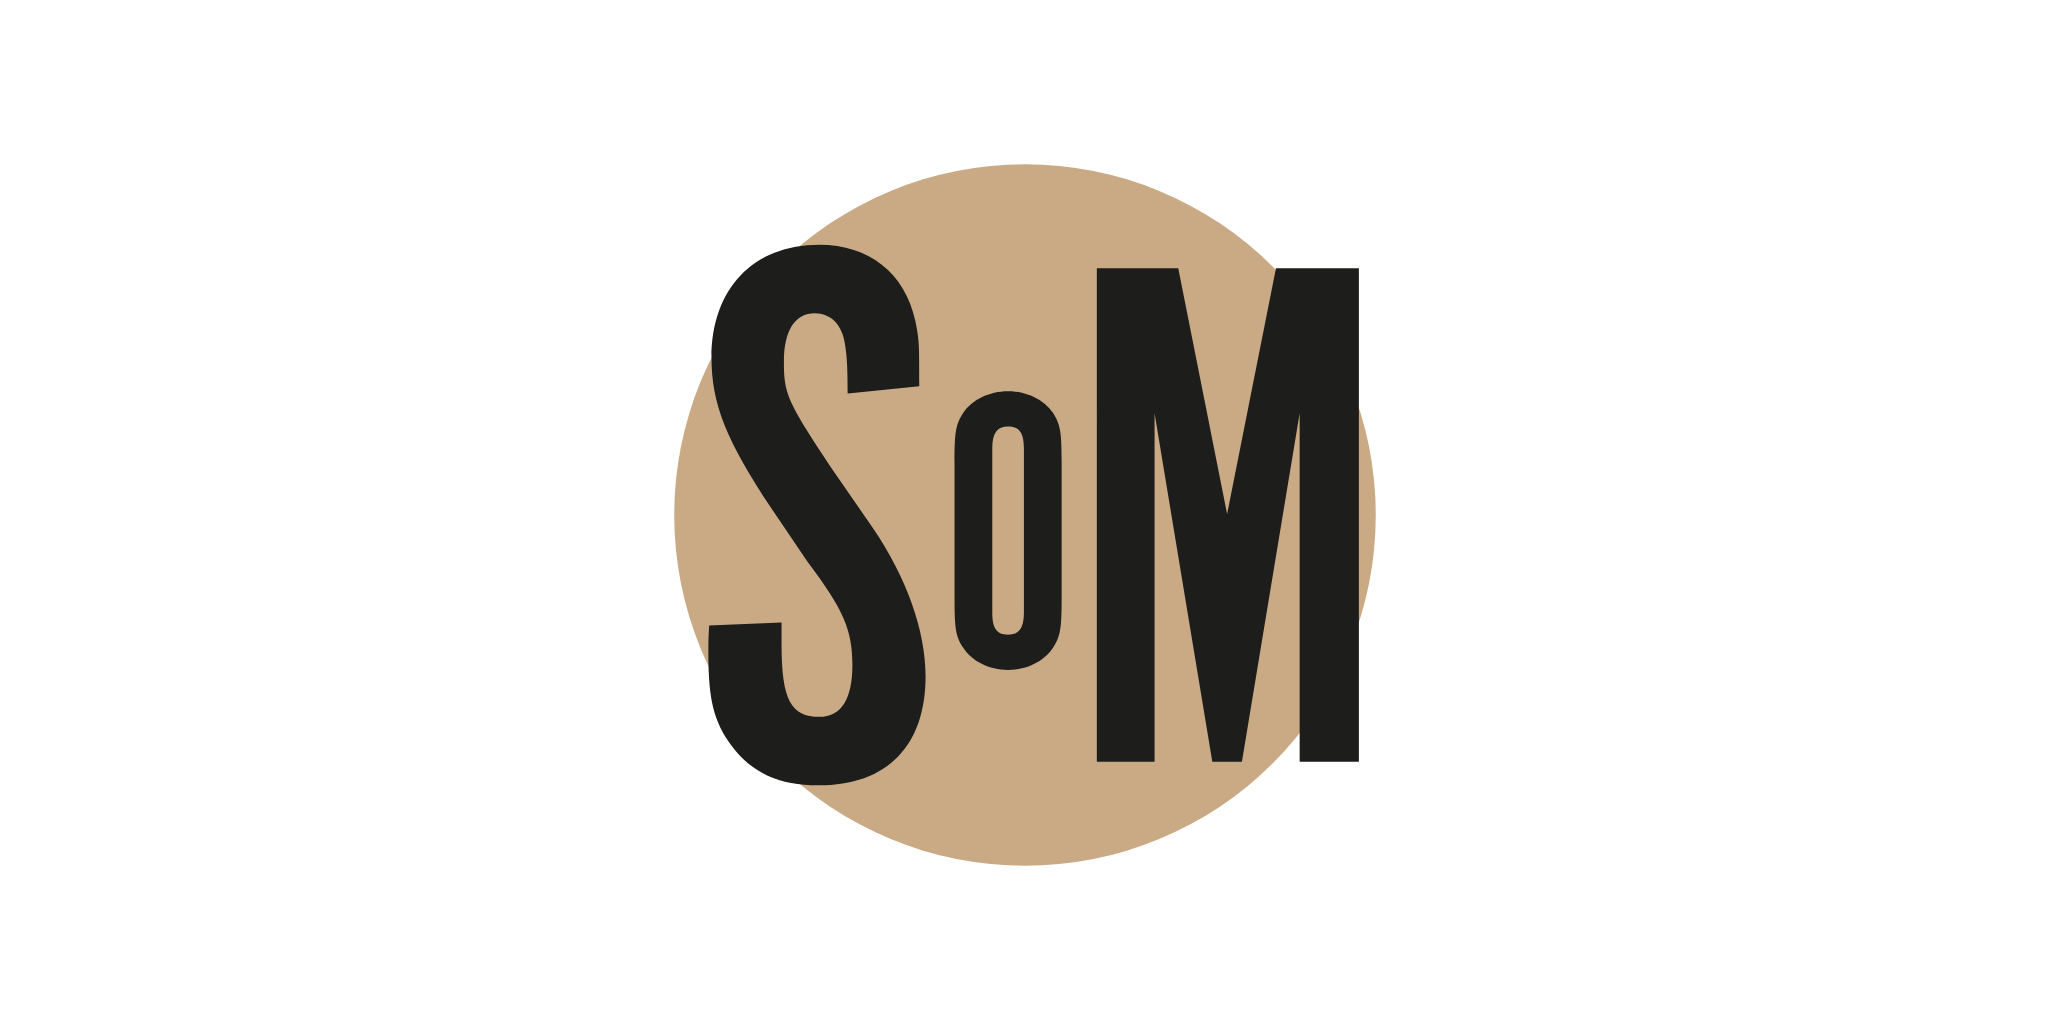 Small version of the SoM logo